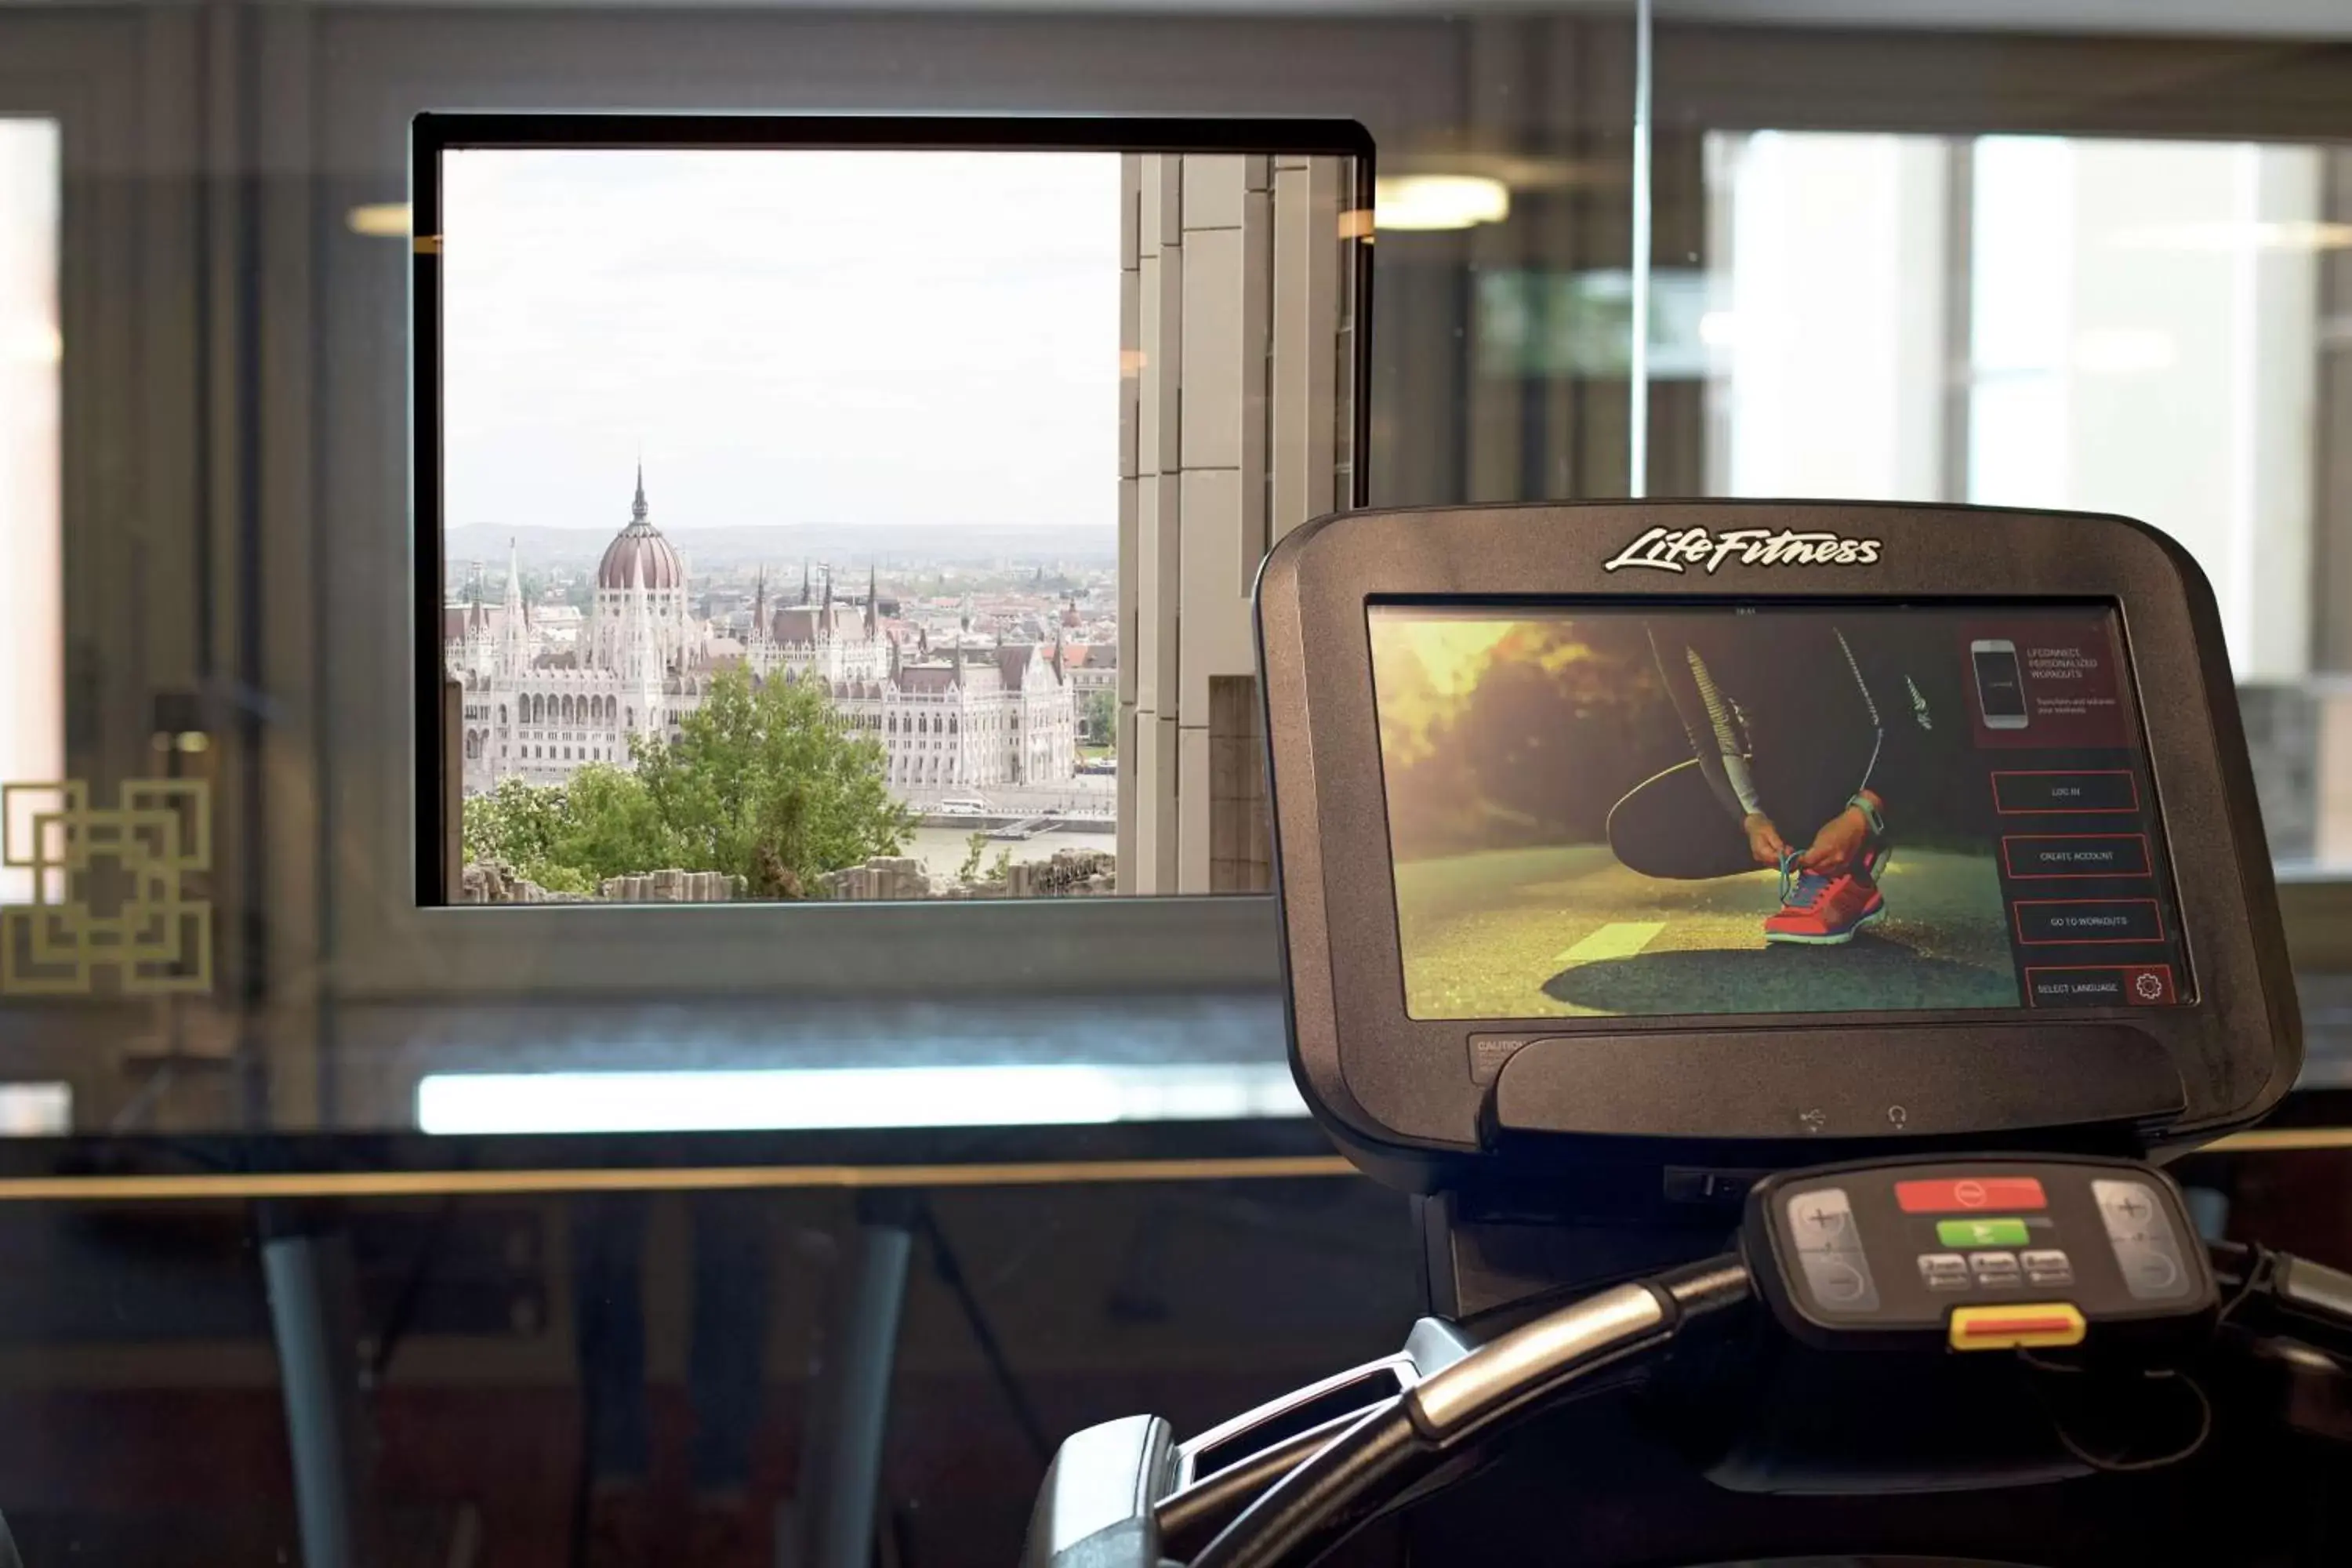 Fitness centre/facilities in Hilton Budapest